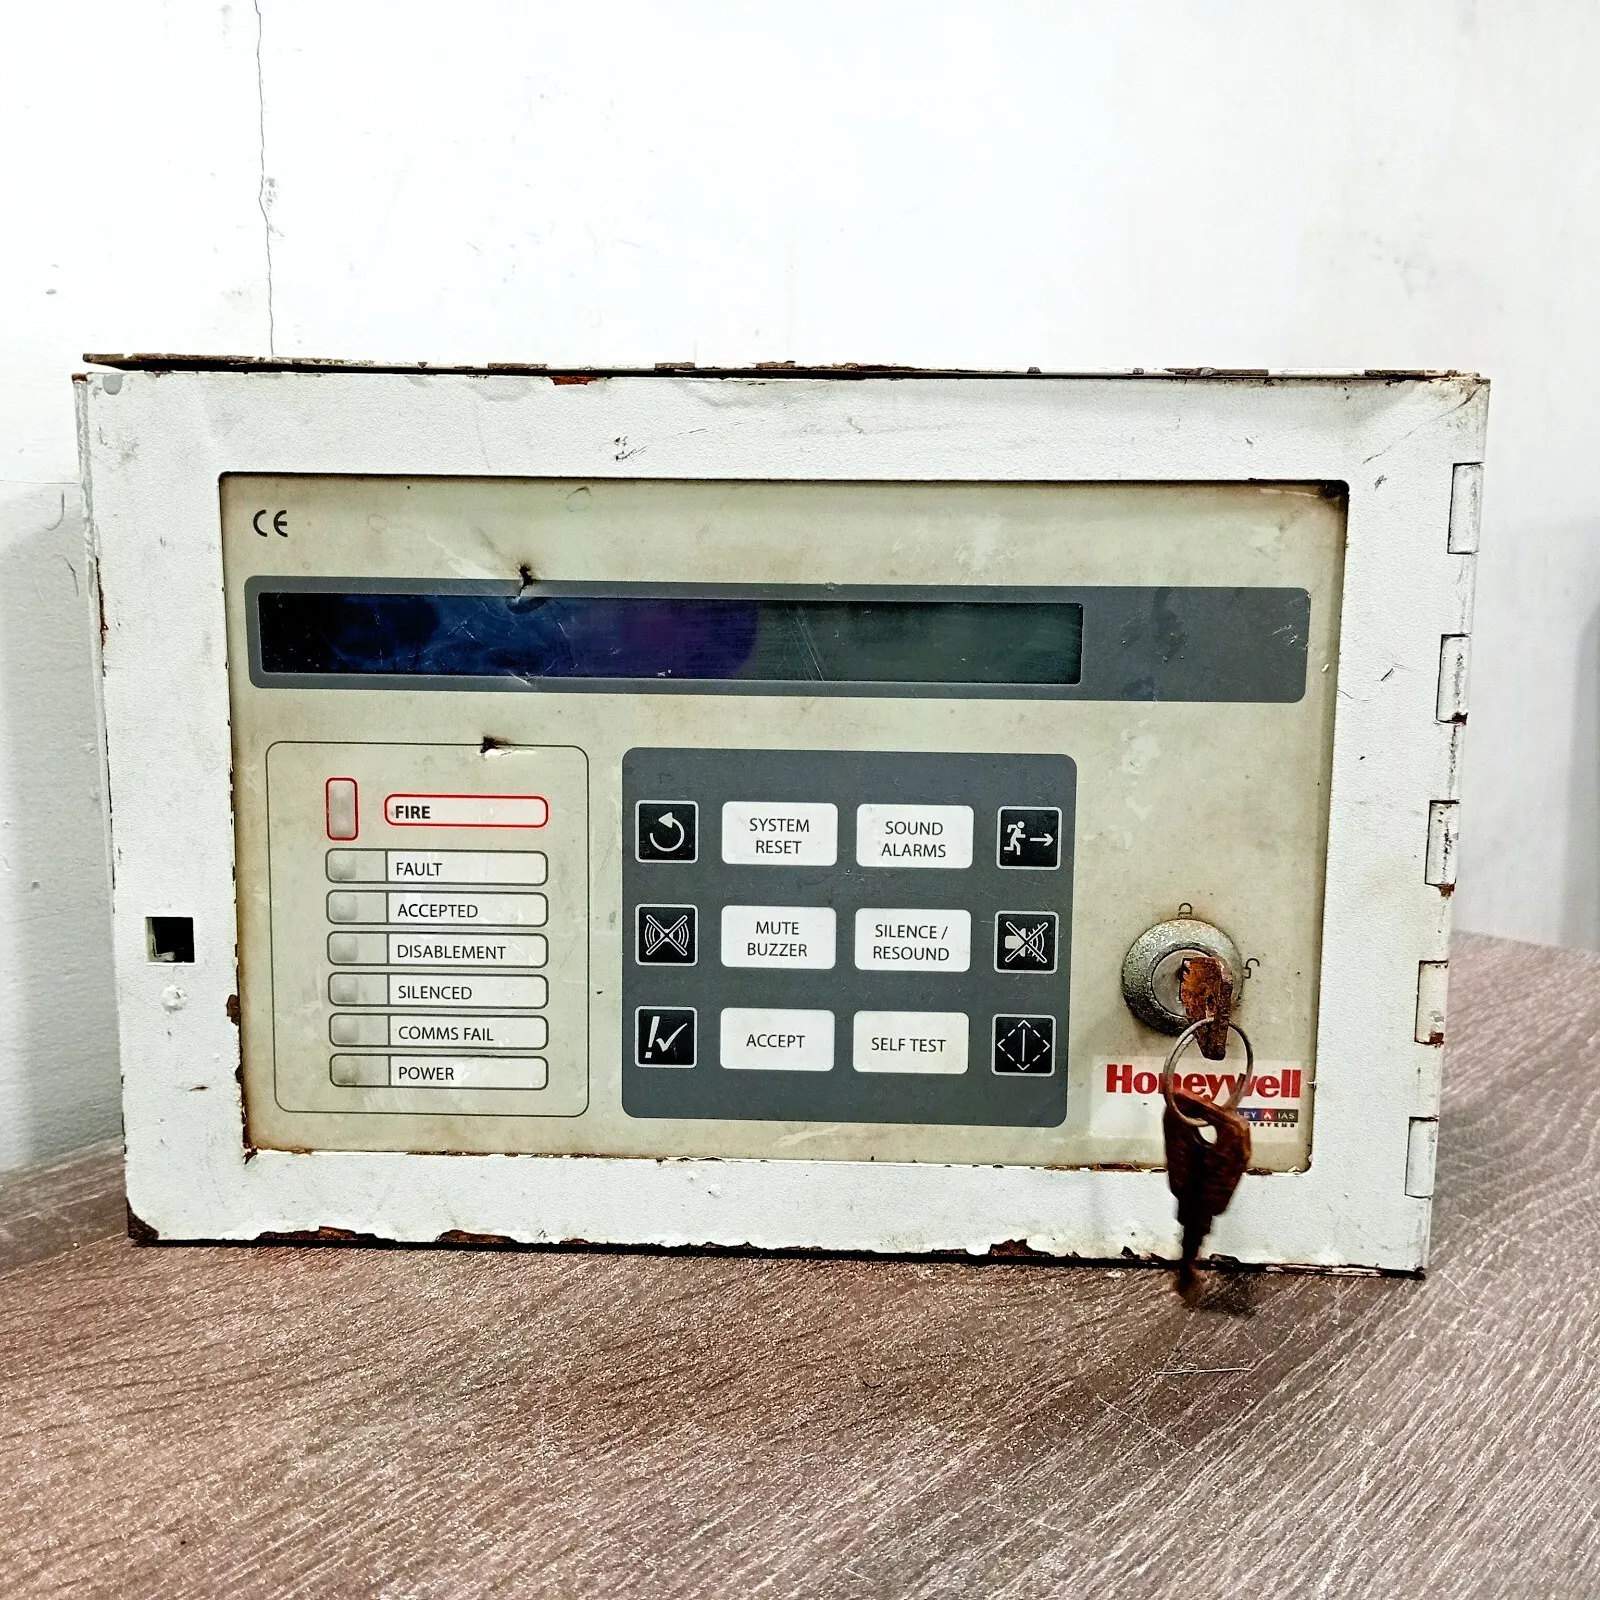 HONEYWELL ADKFAR00AS Active Repeater Panel ZXRA BASE 709-601-001 111-CPR-2014 G214078 124-318 H016-0023-X